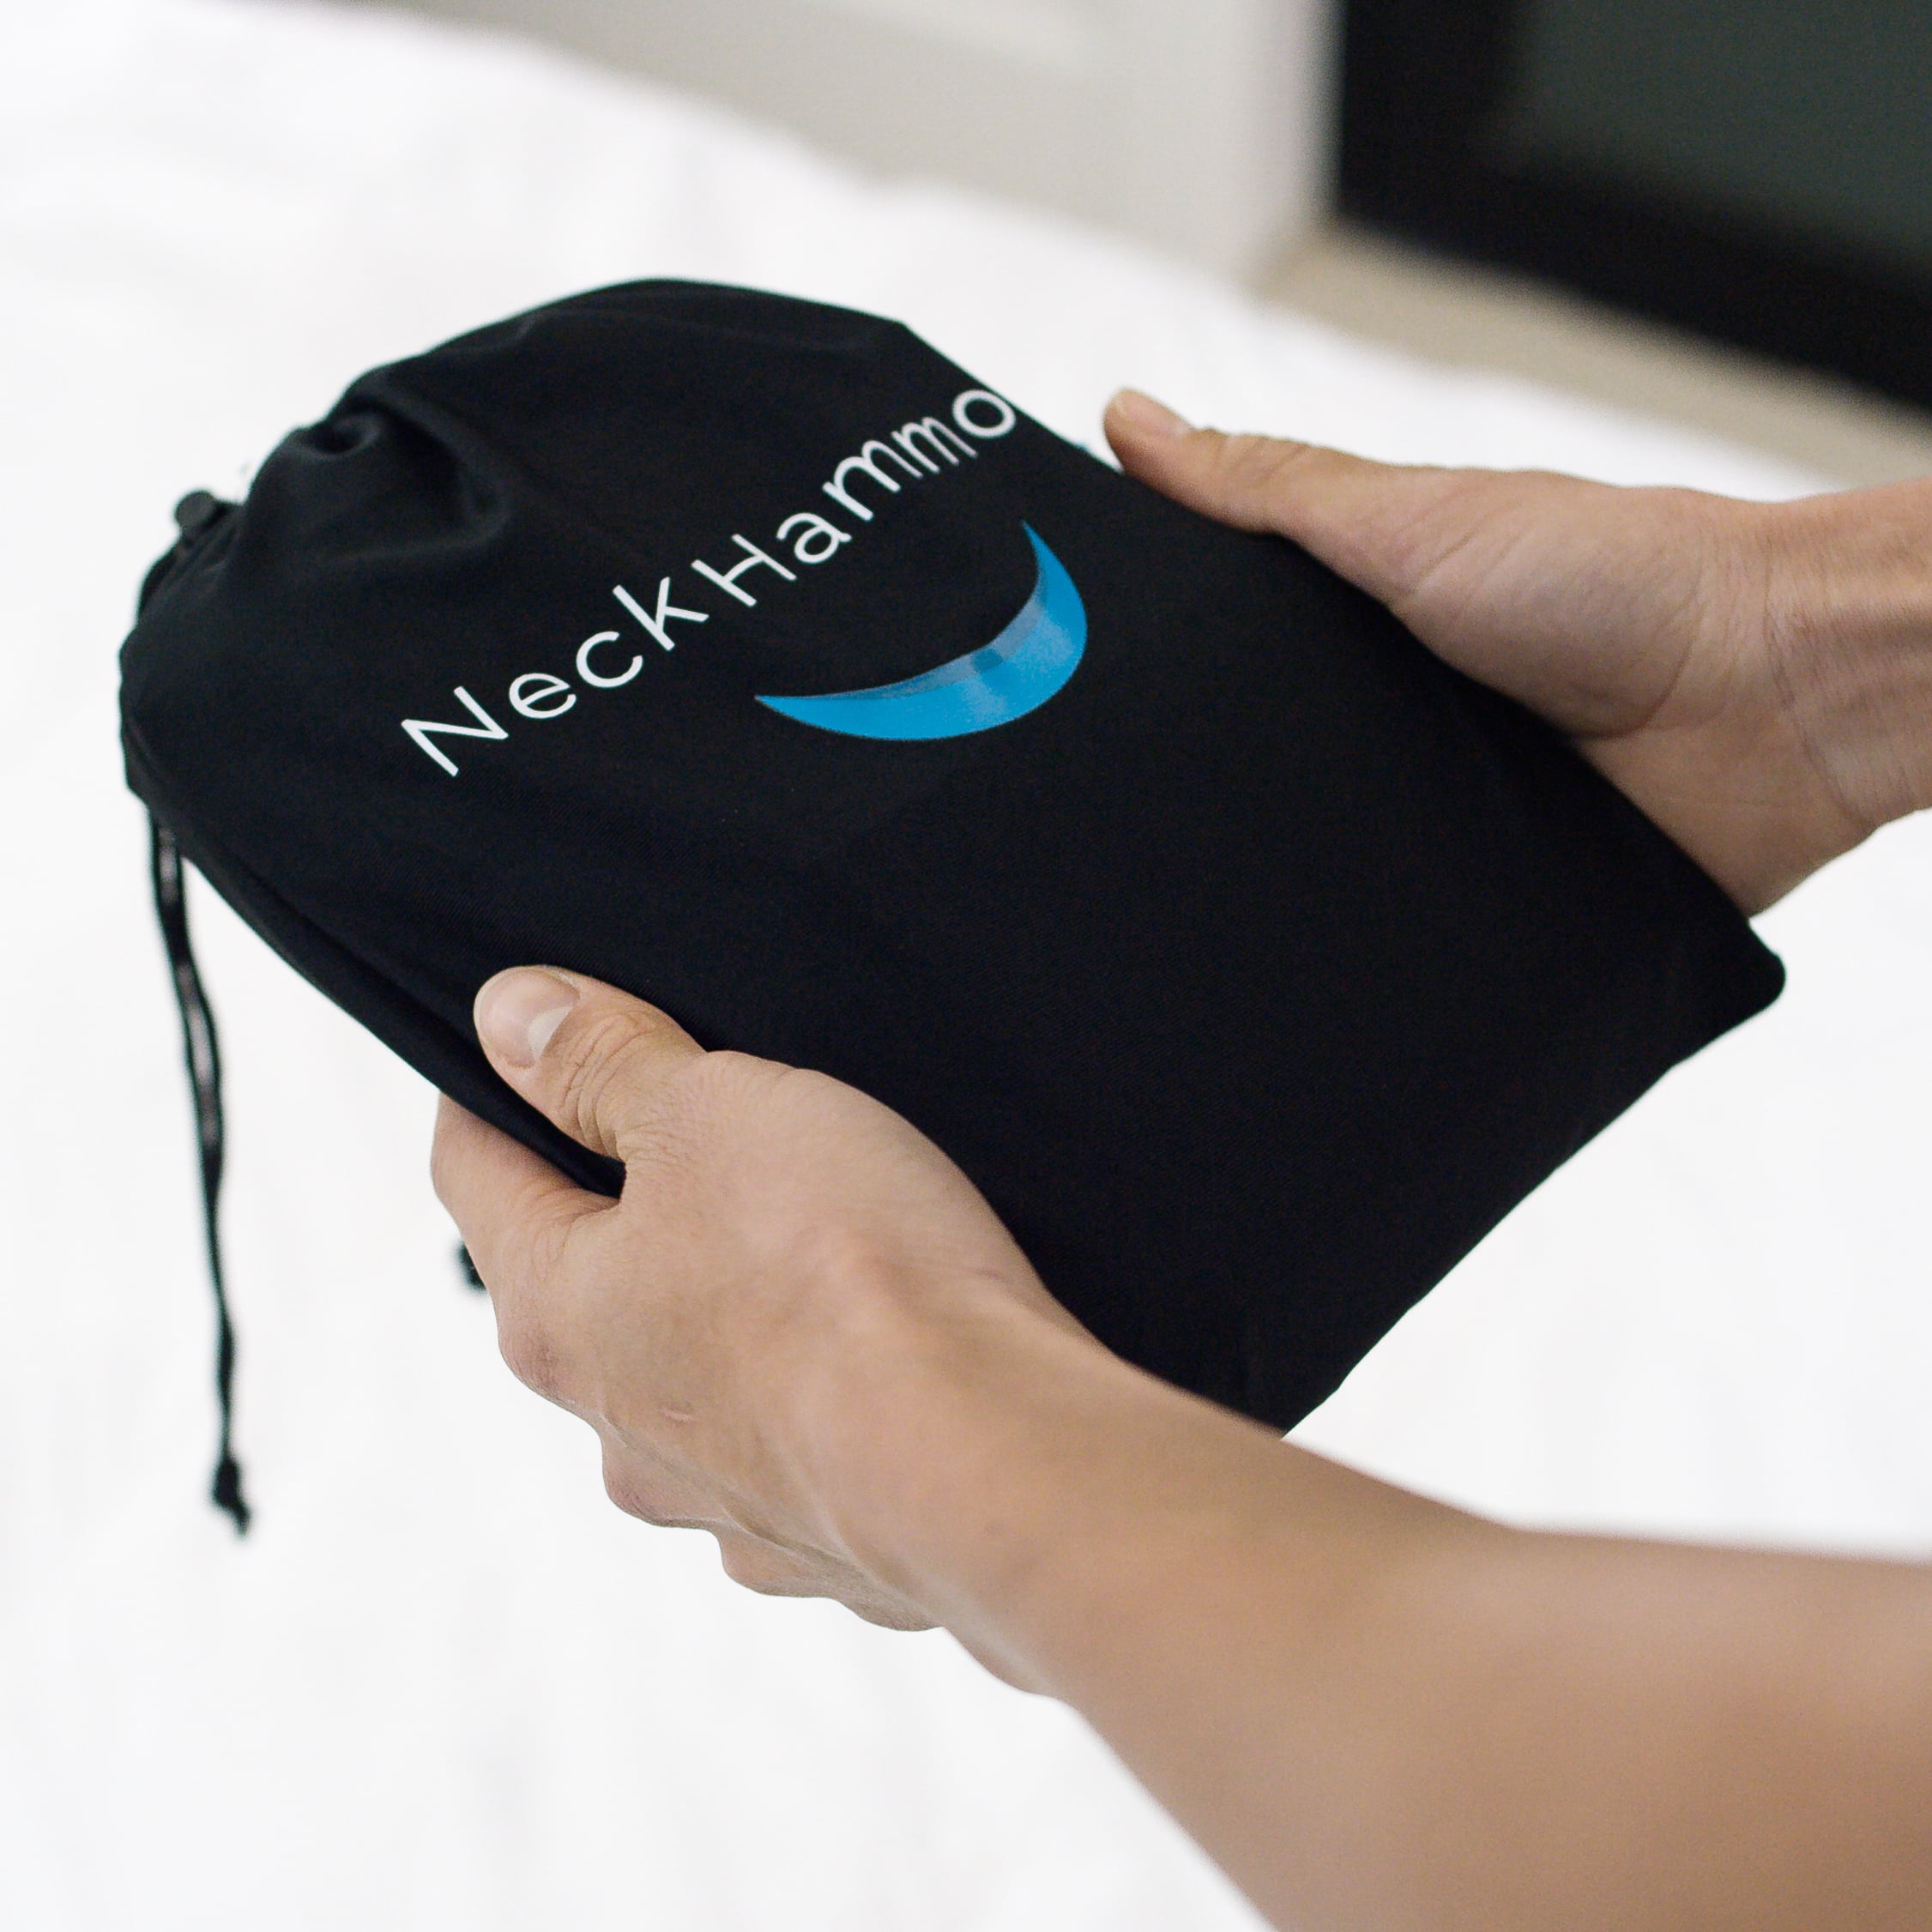 The Original Neck Hammock - Cervical Traction Device for Pain Relief -  Portable Neck Stretcher and Decompression Device for Tension Relief